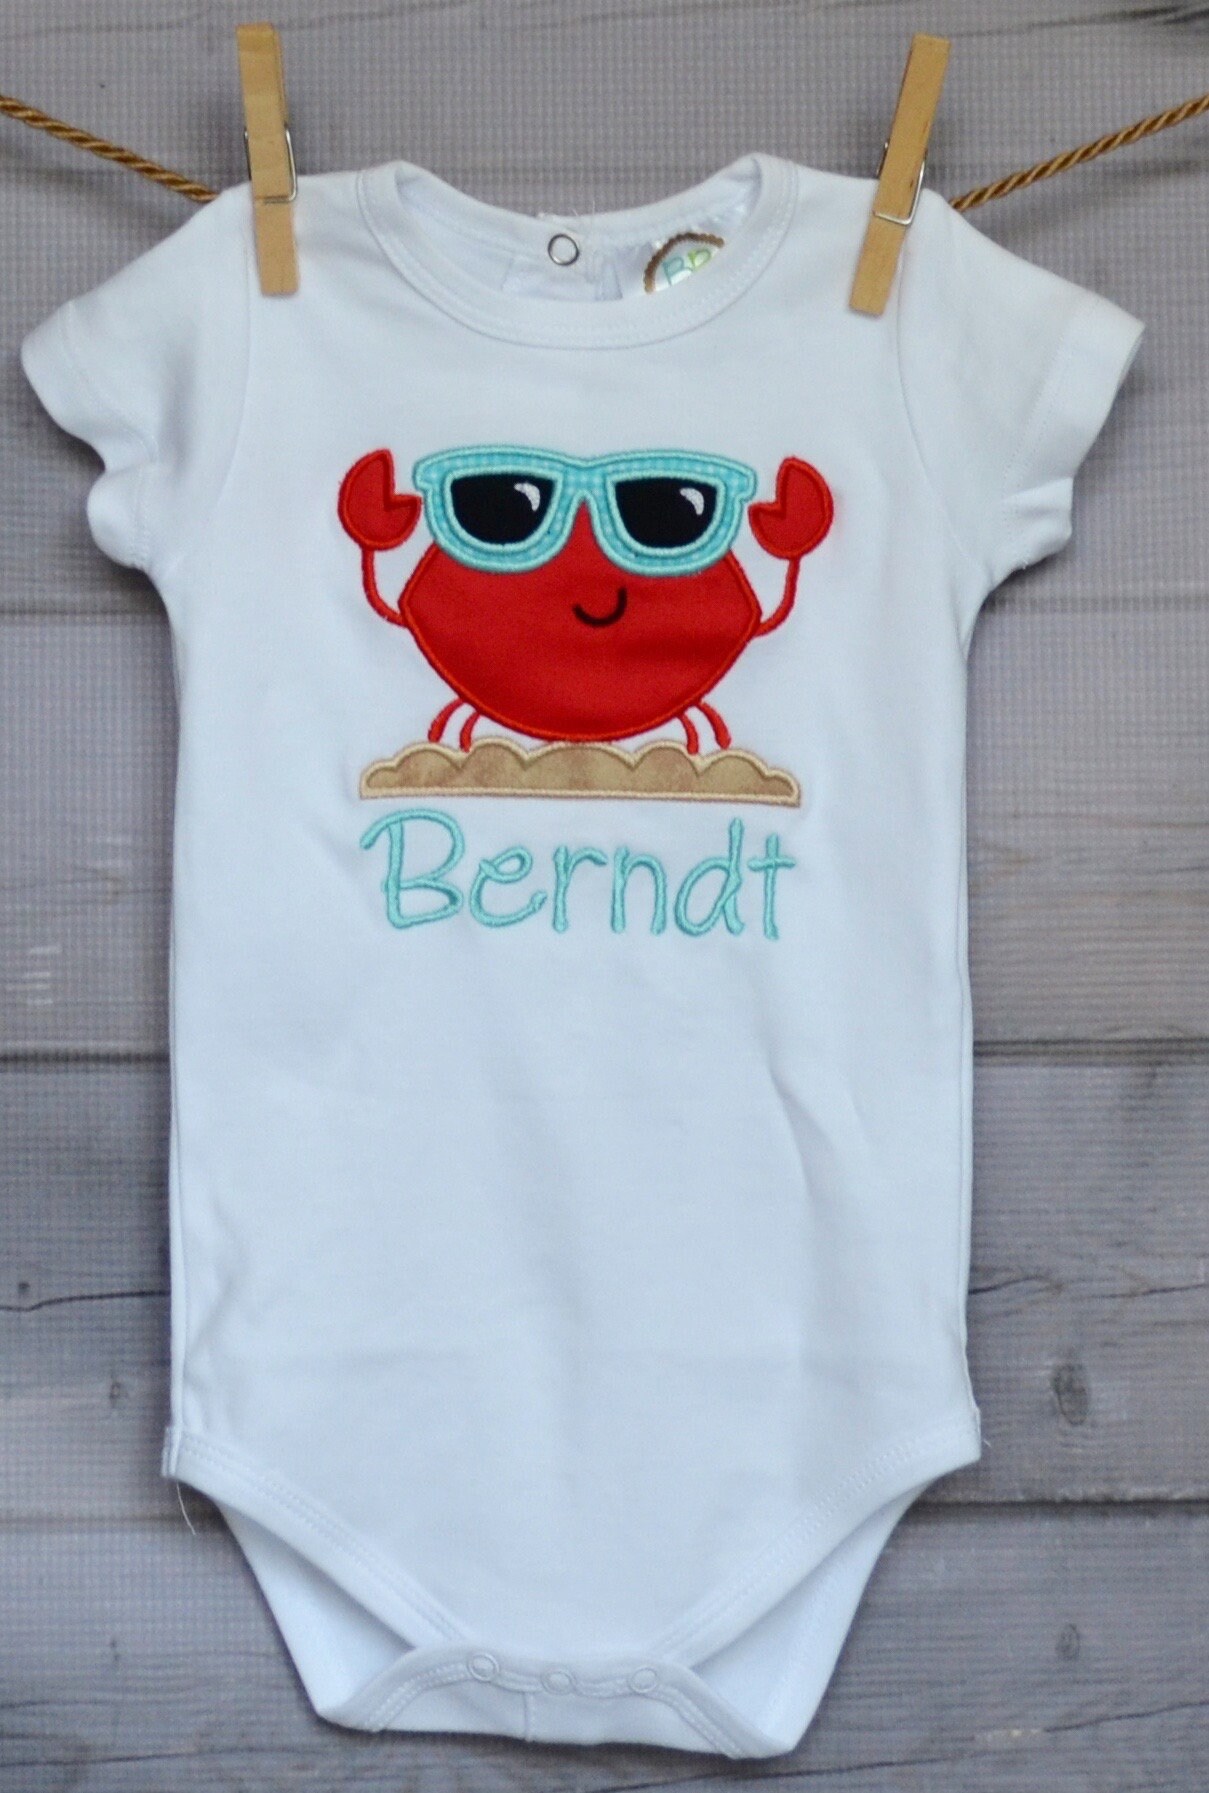 Personalized One Cool Crab With Sunglasses Applique Shirt Or Bodysuit Boy Girl